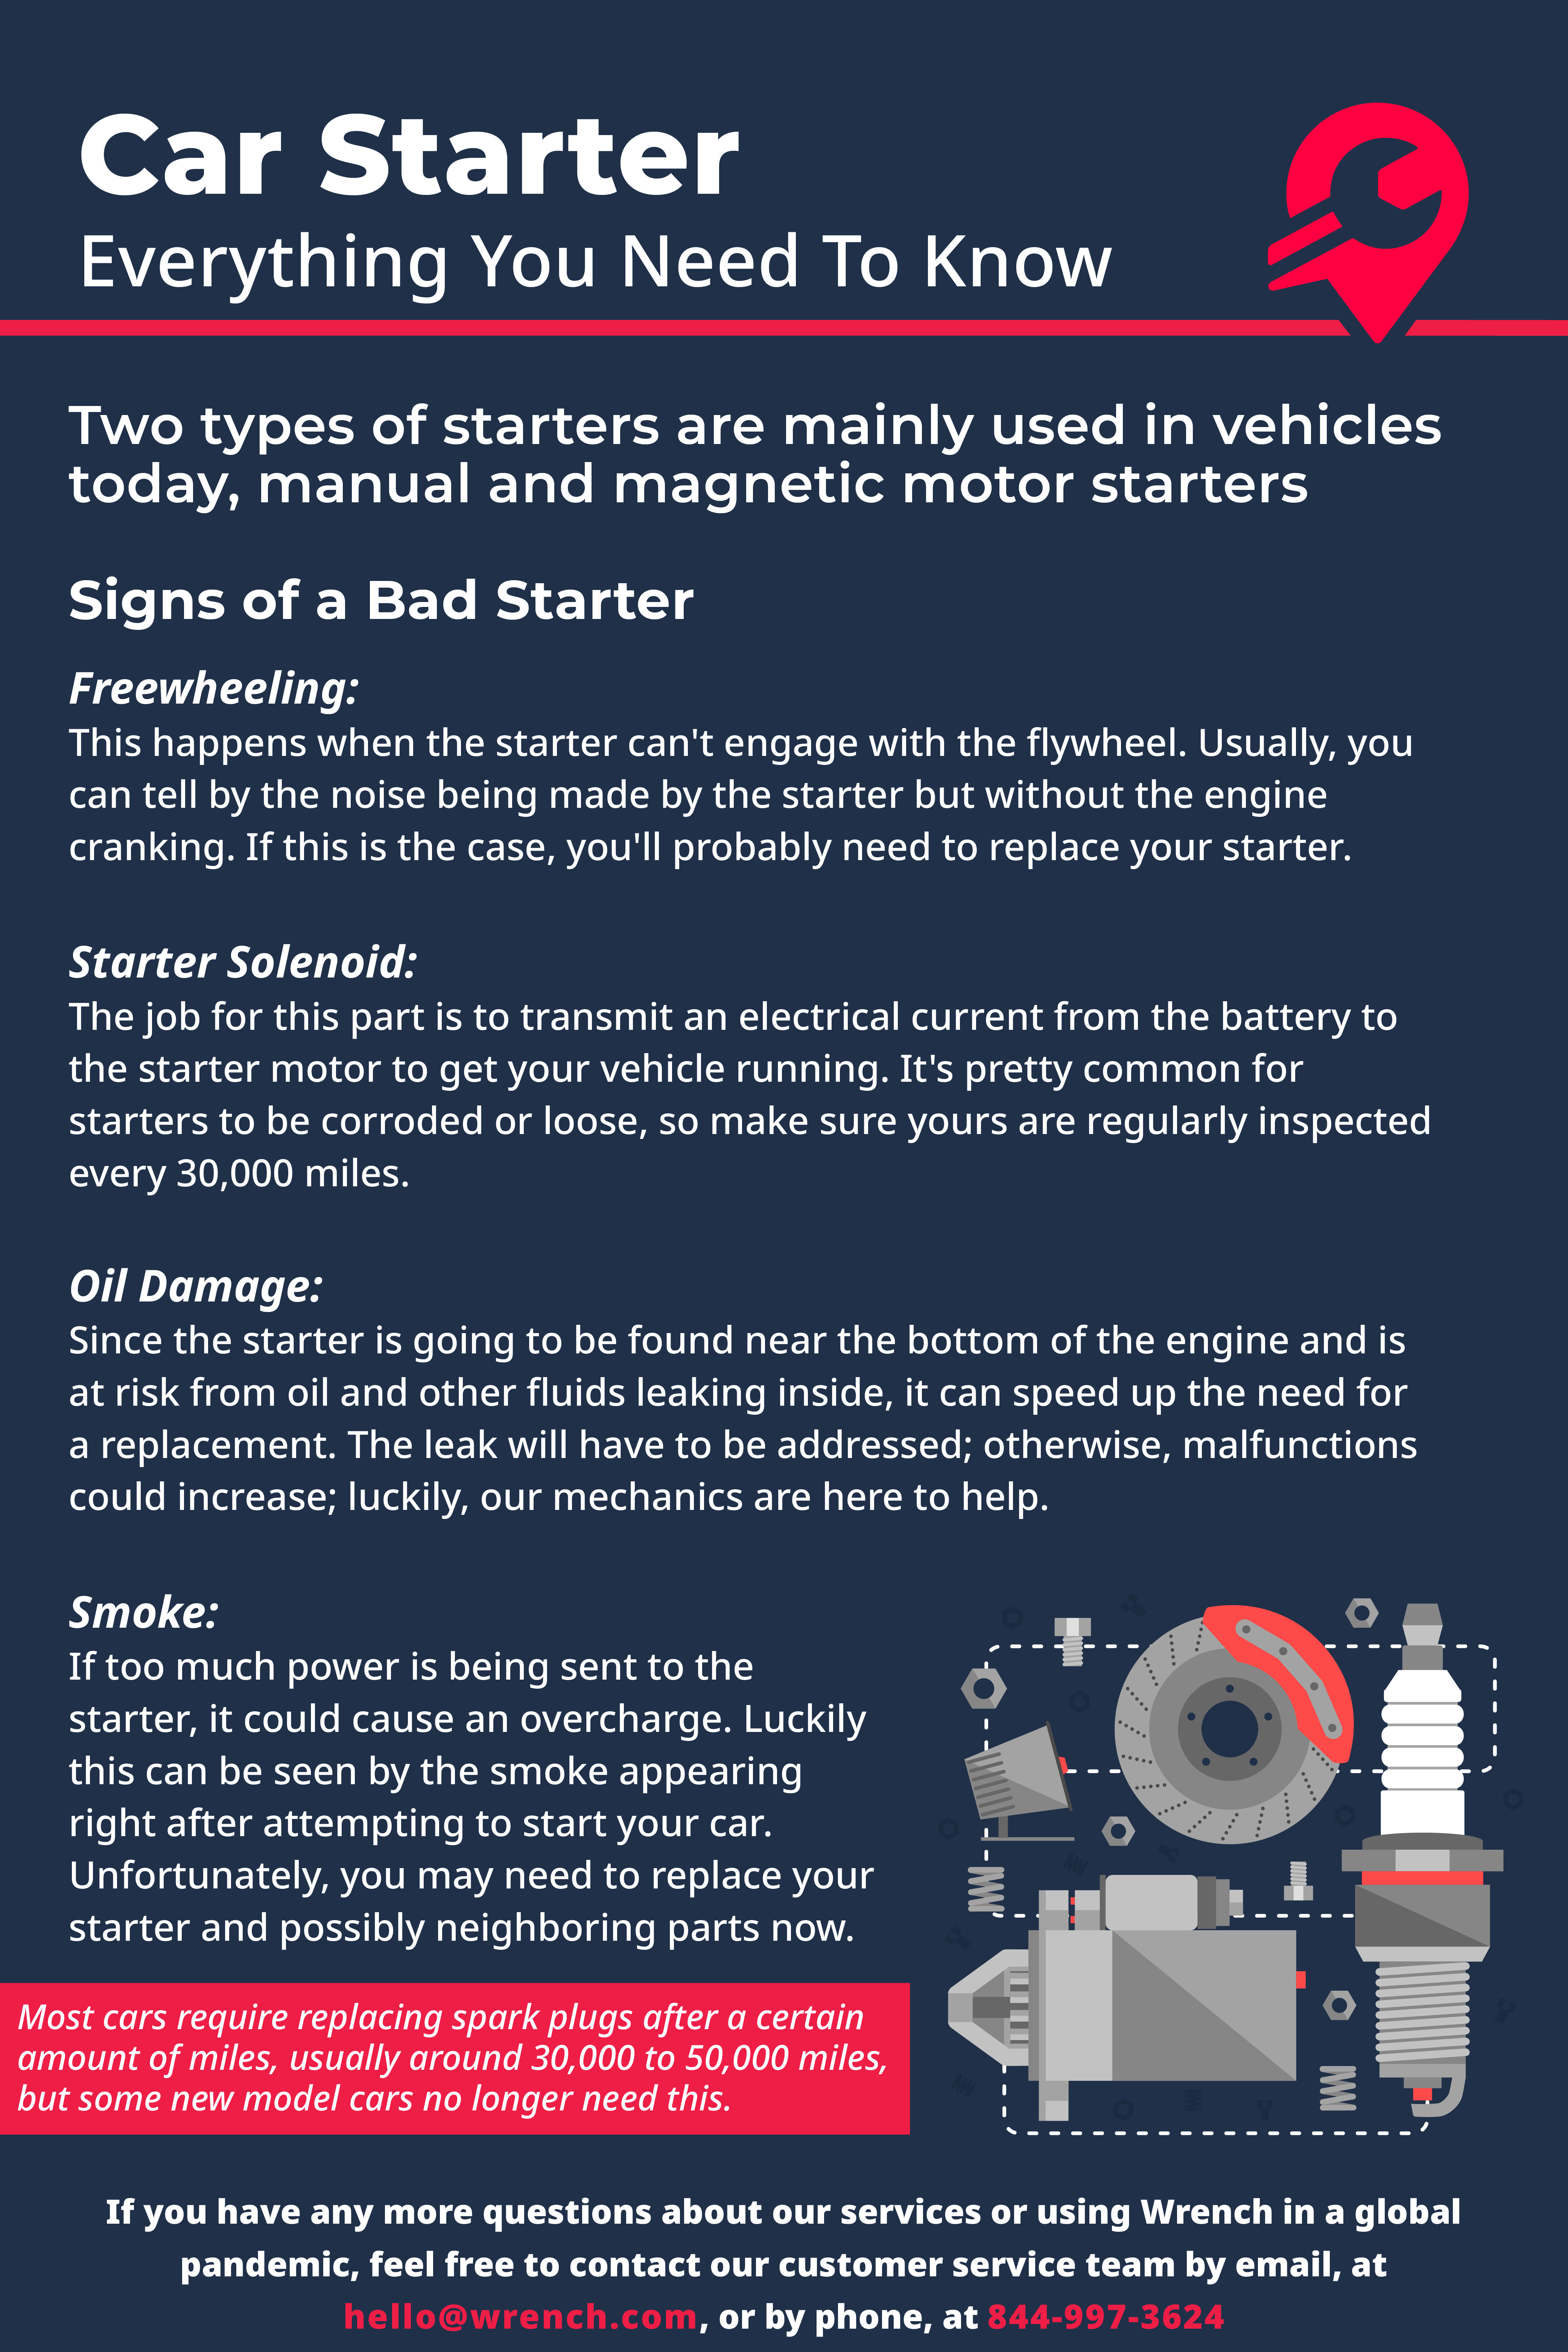 Symptoms of a Car Starter and What to Look Out For